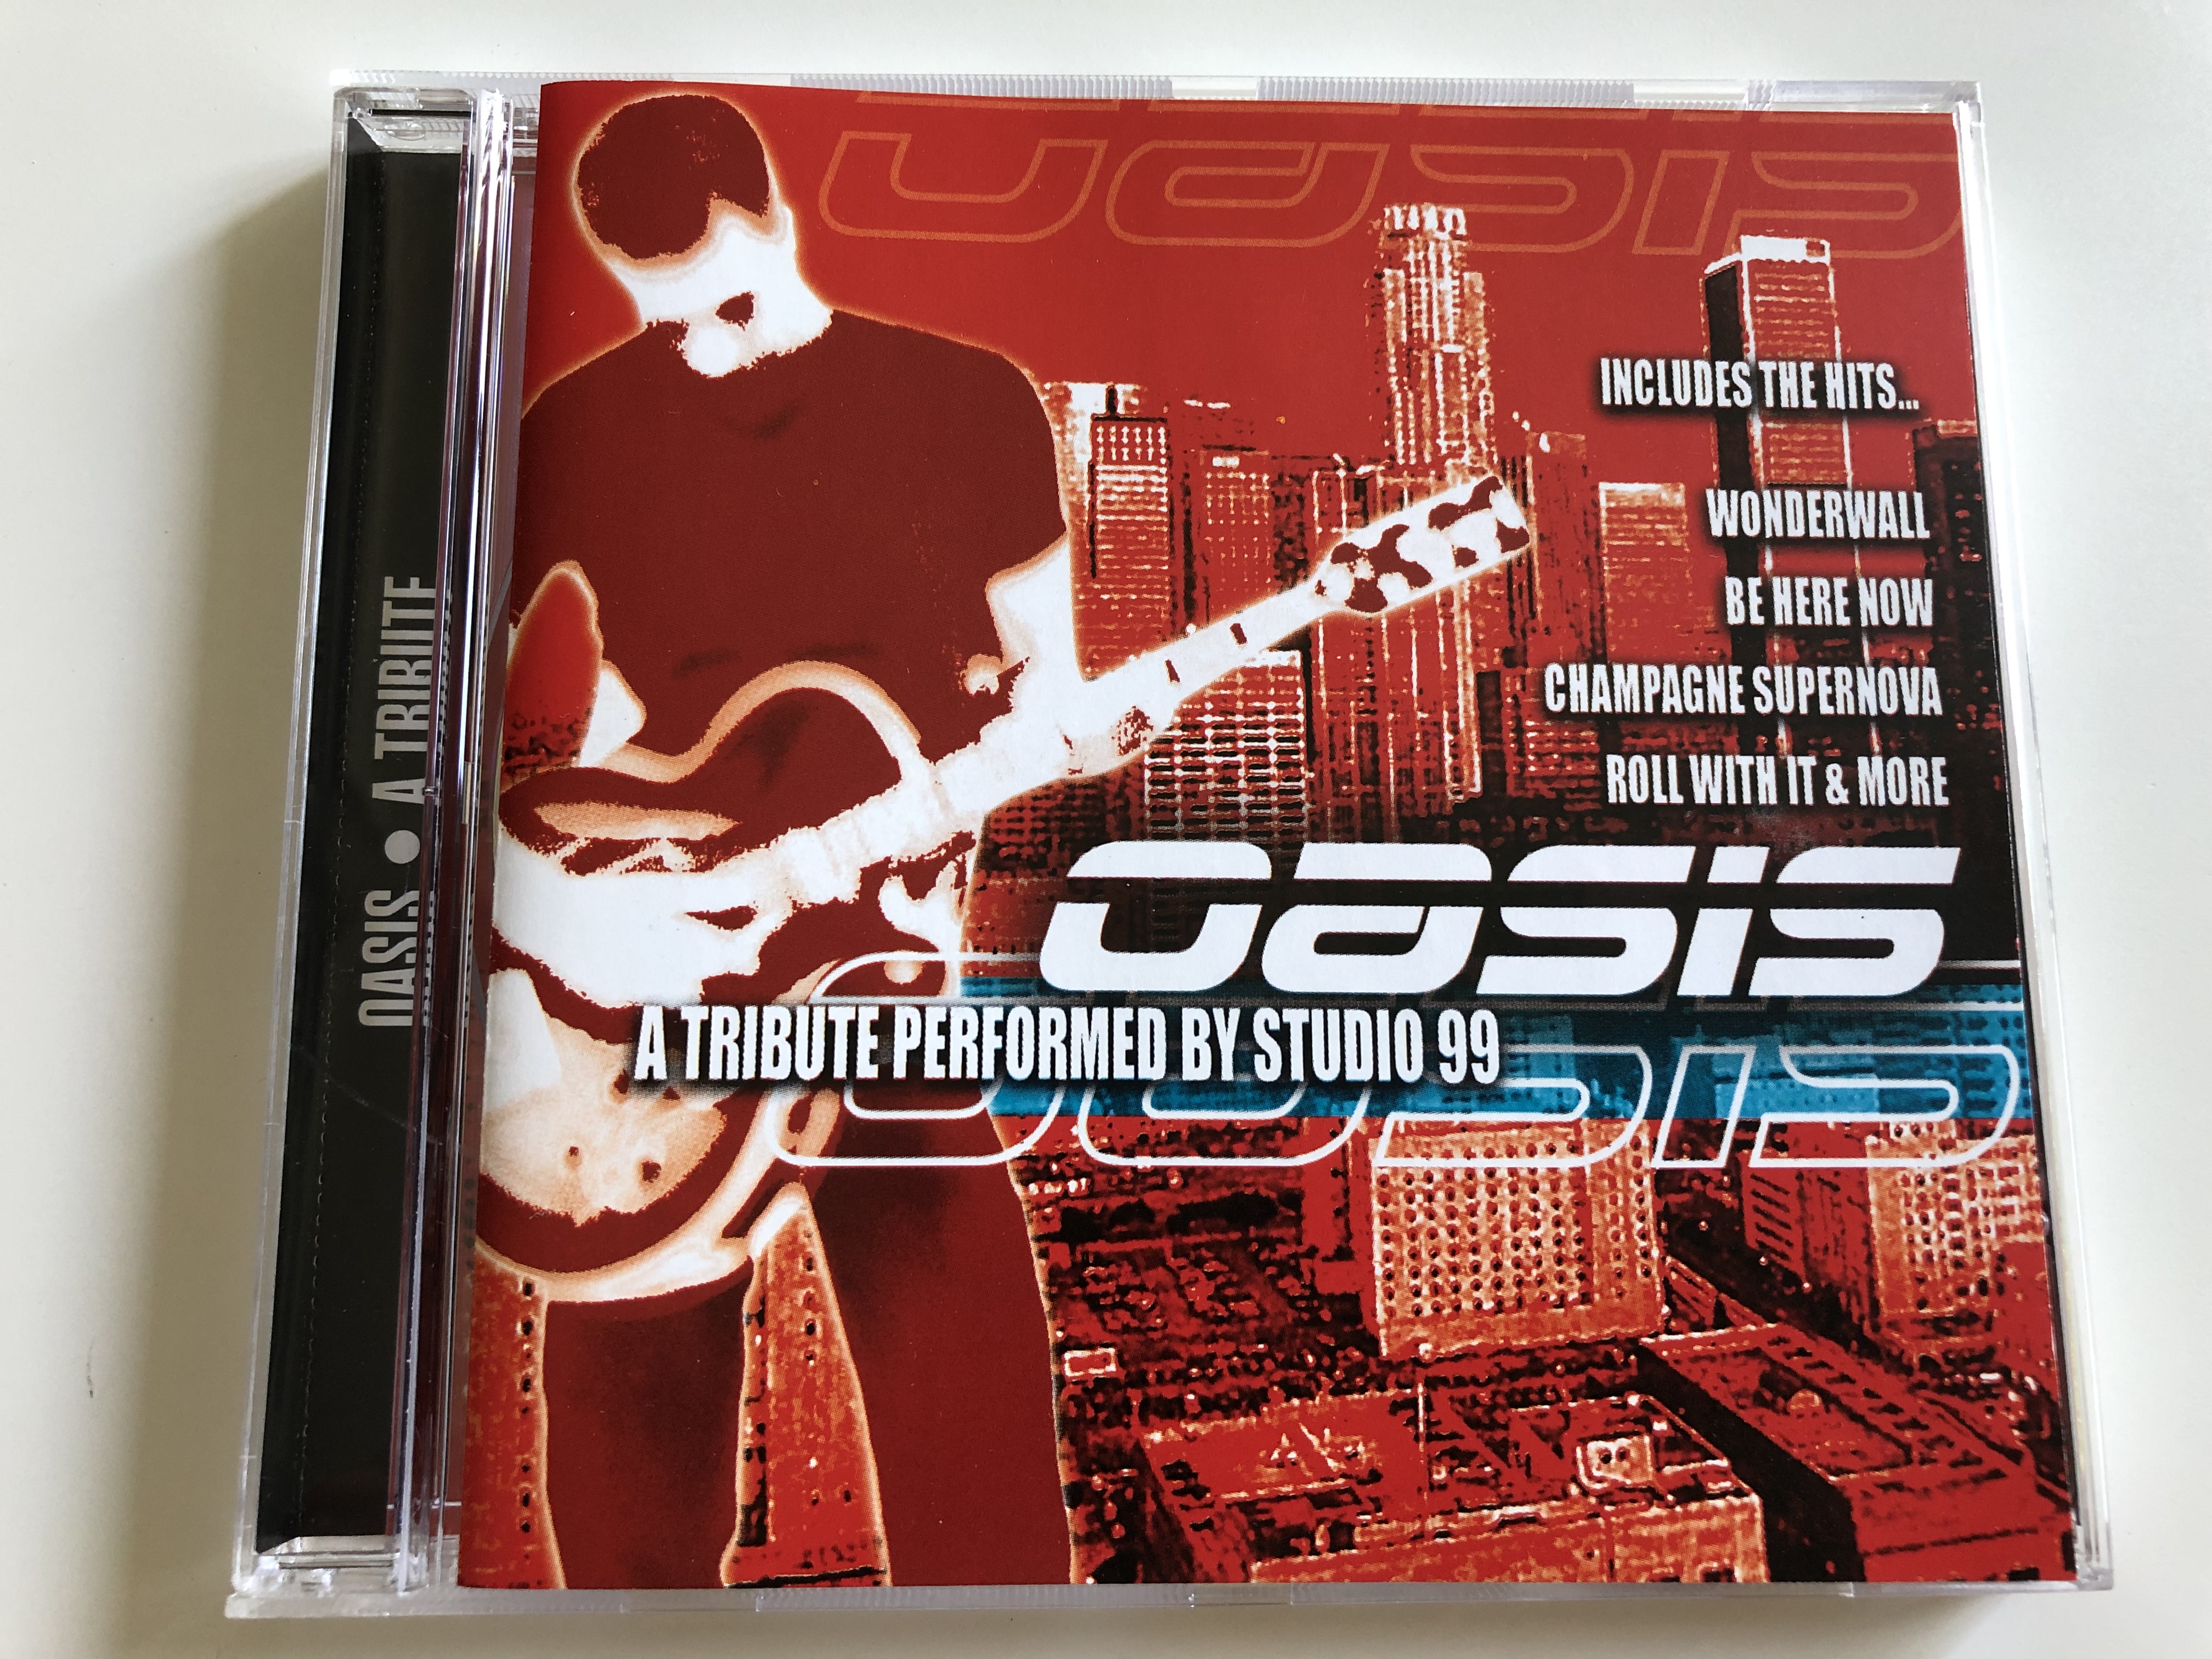 oasis-a-tribute-performed-by-studio-99-includes-the-hits...-wonderwall-be-here-now-champagne-supernova-roll-with-it-more-audio-cd-gfs530-1-.jpg